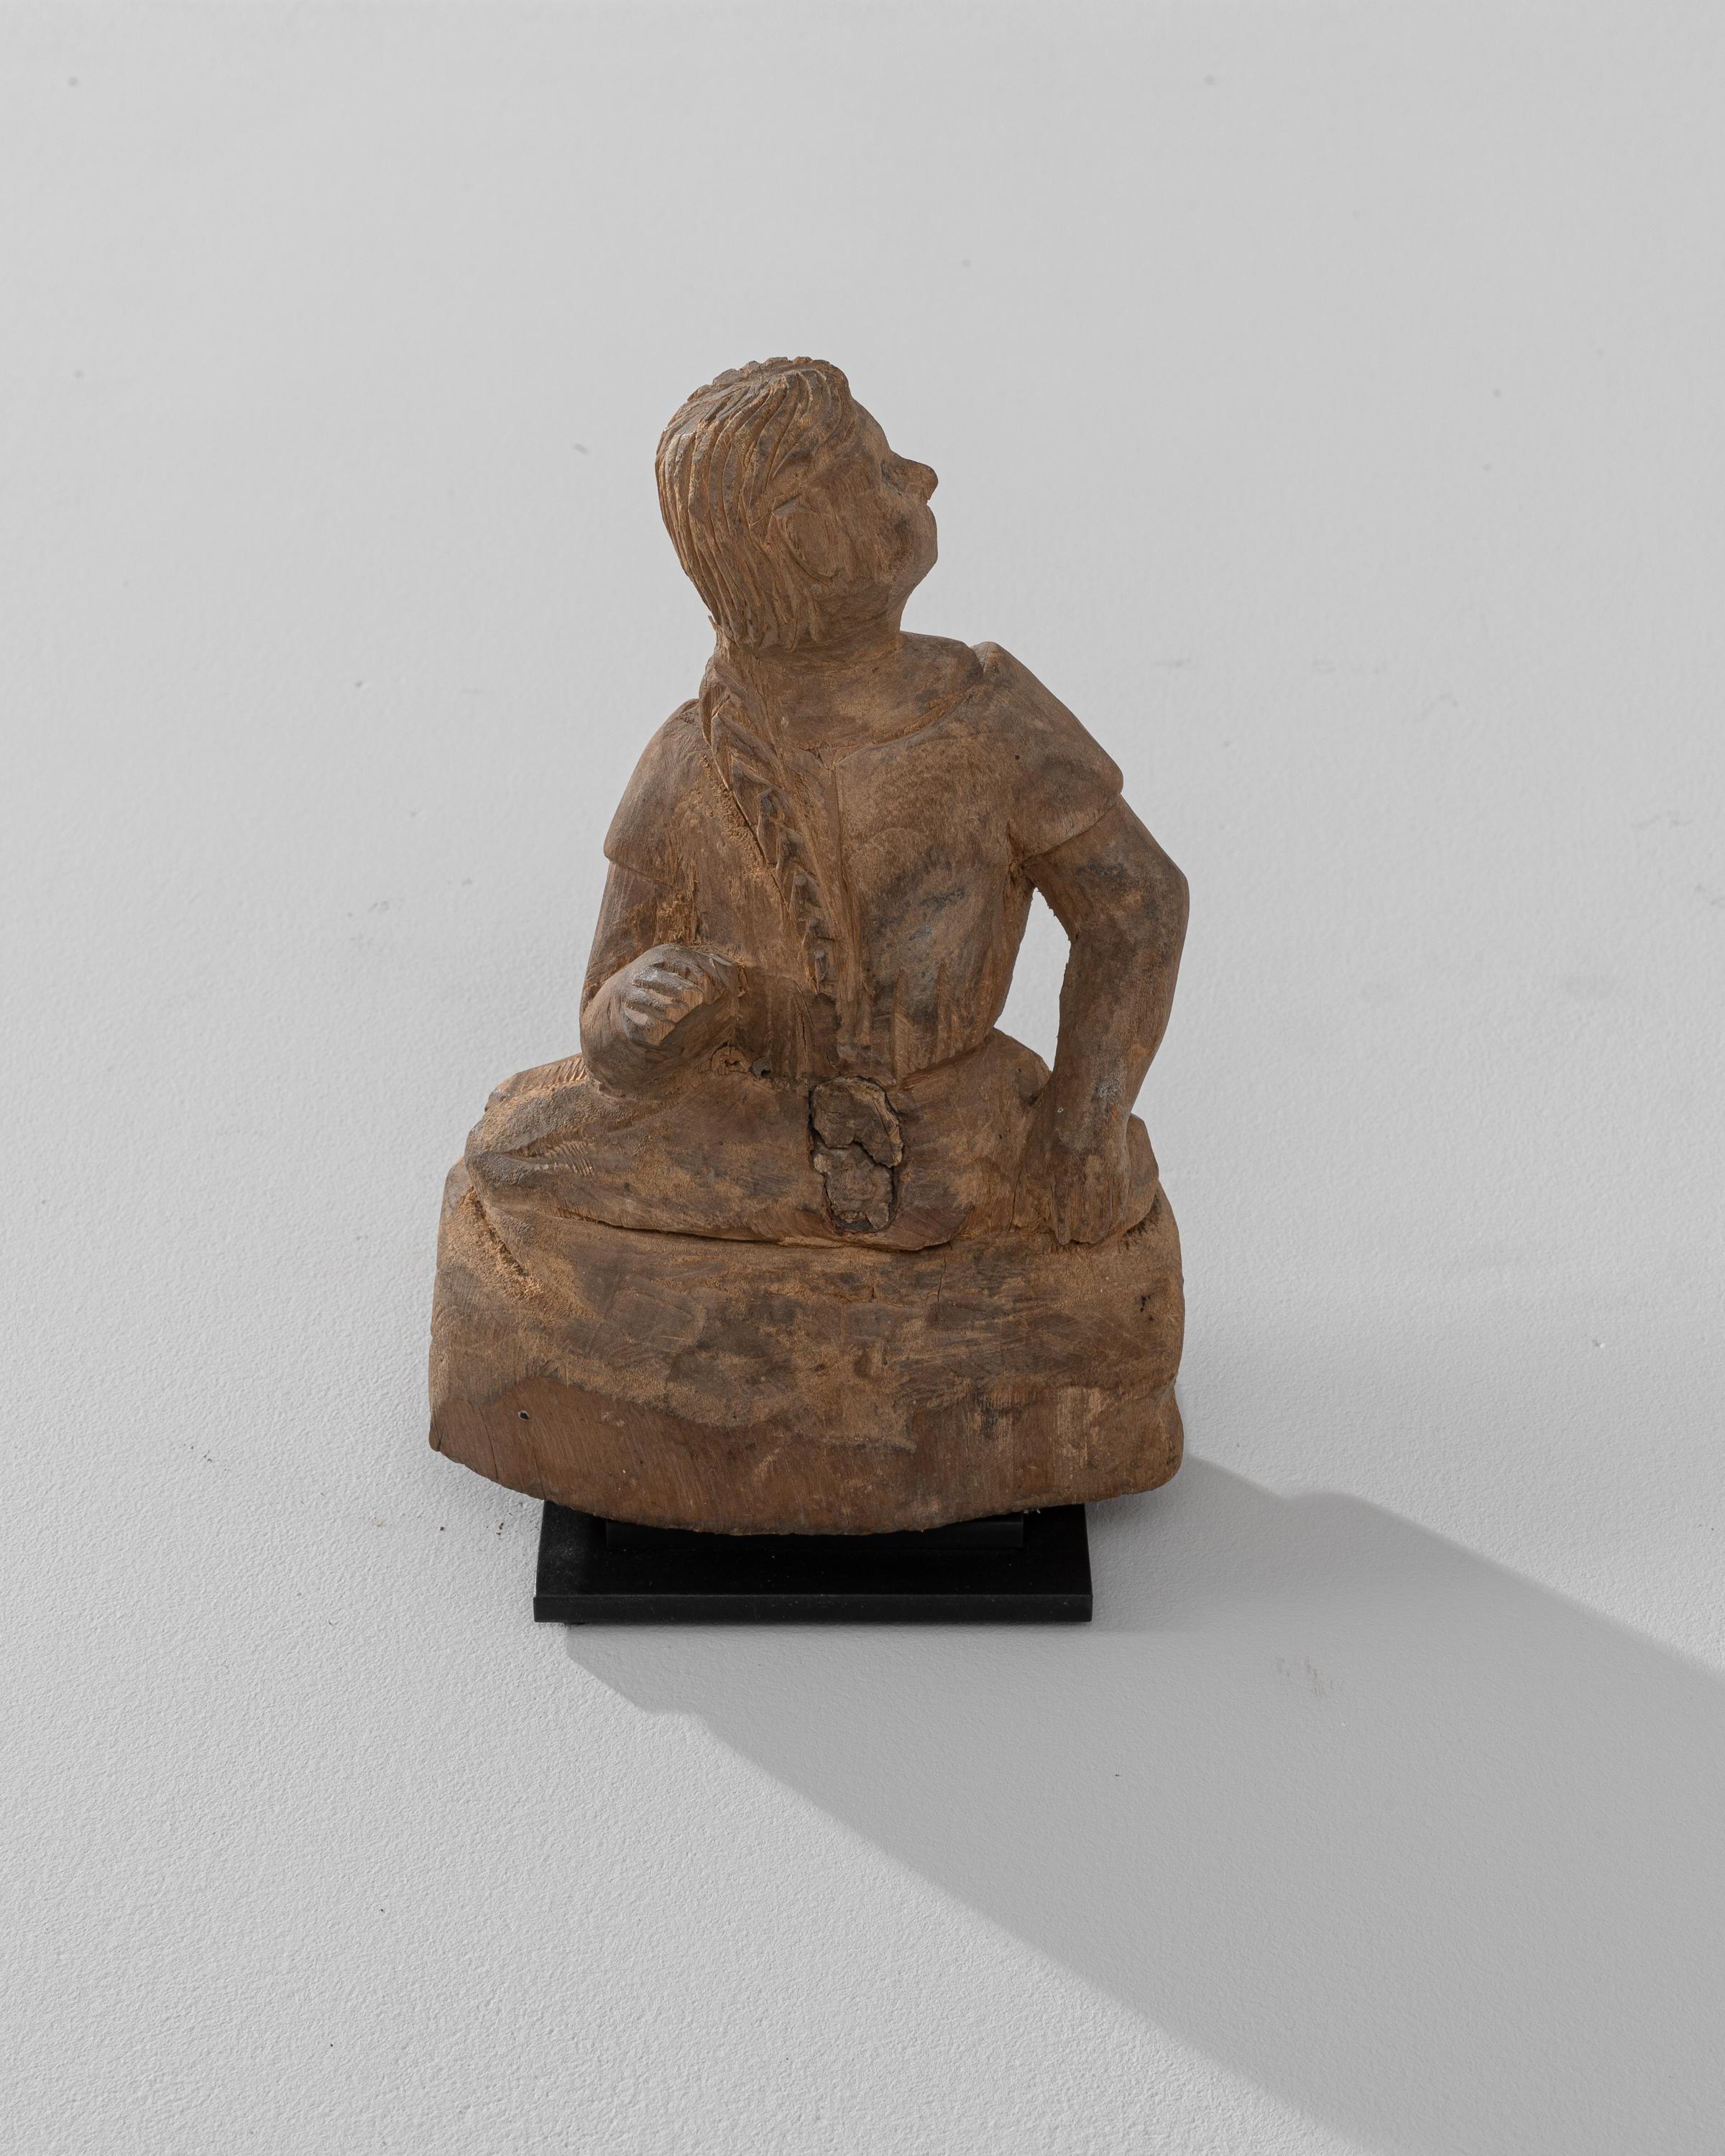 This 19th Century French Wooden Decoration on Metal Stand portrays a thoughtful, seated young girl, captured in a moment of quiet contemplation. The craftsmanship is evident in the detailed carving of her hair and clothing, bringing life and